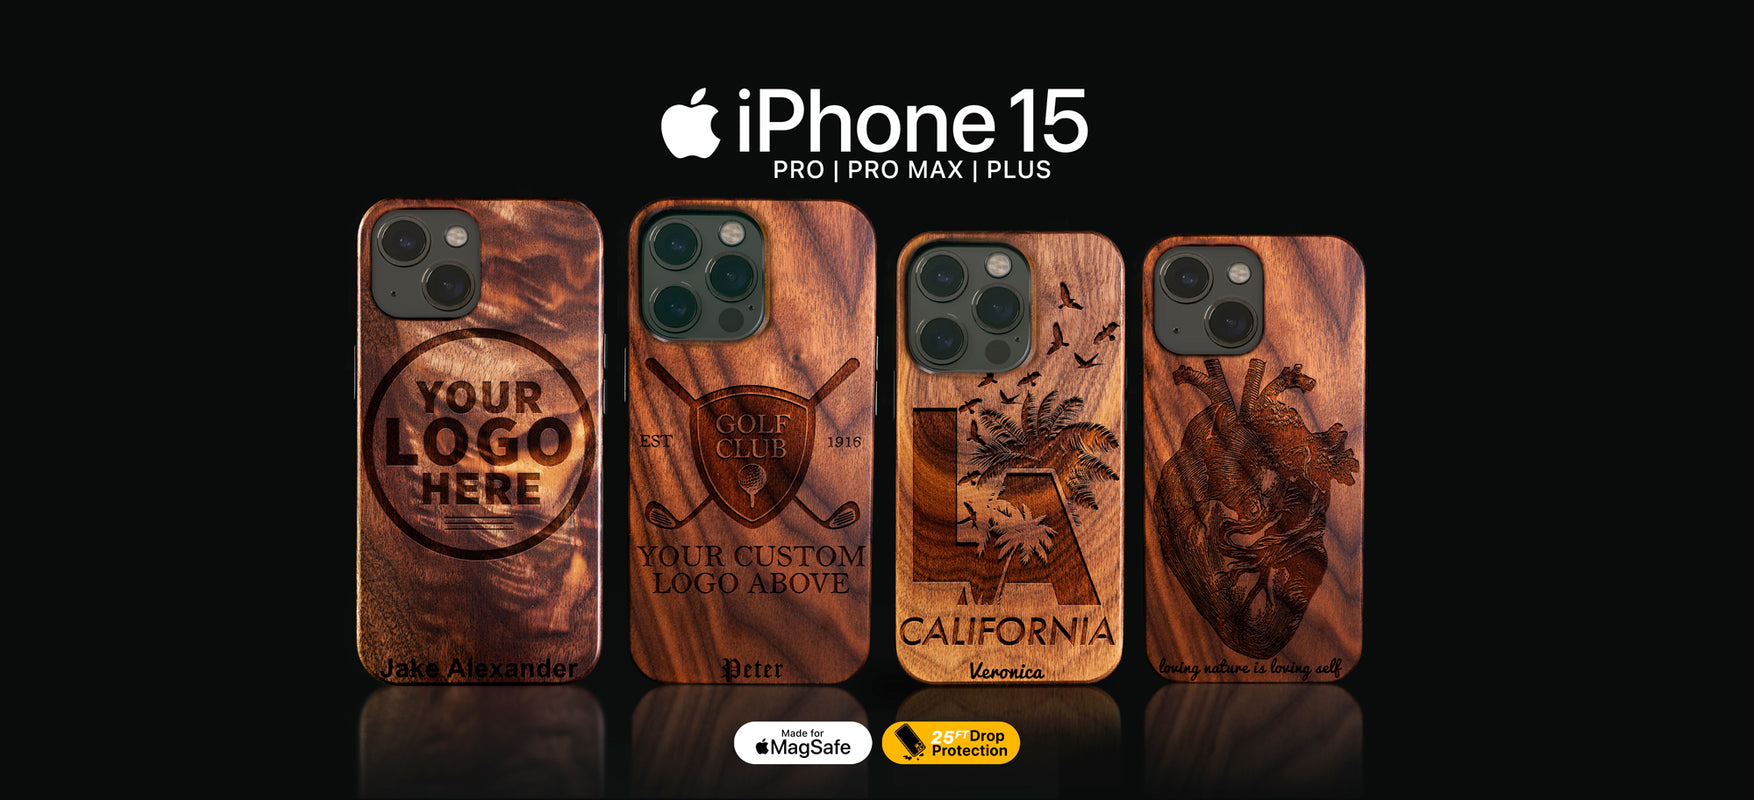 Wood Carved iPhone 15 Pro Max Cases - Customized Monogrammed Wood Carved MagSafe iPhone 15 Pro Max Cover | Design Your Own iPhone Case - Ecofriendly Bio-Degradable Best iPhone 15 Pro Max Cases | By Engraved In Nature